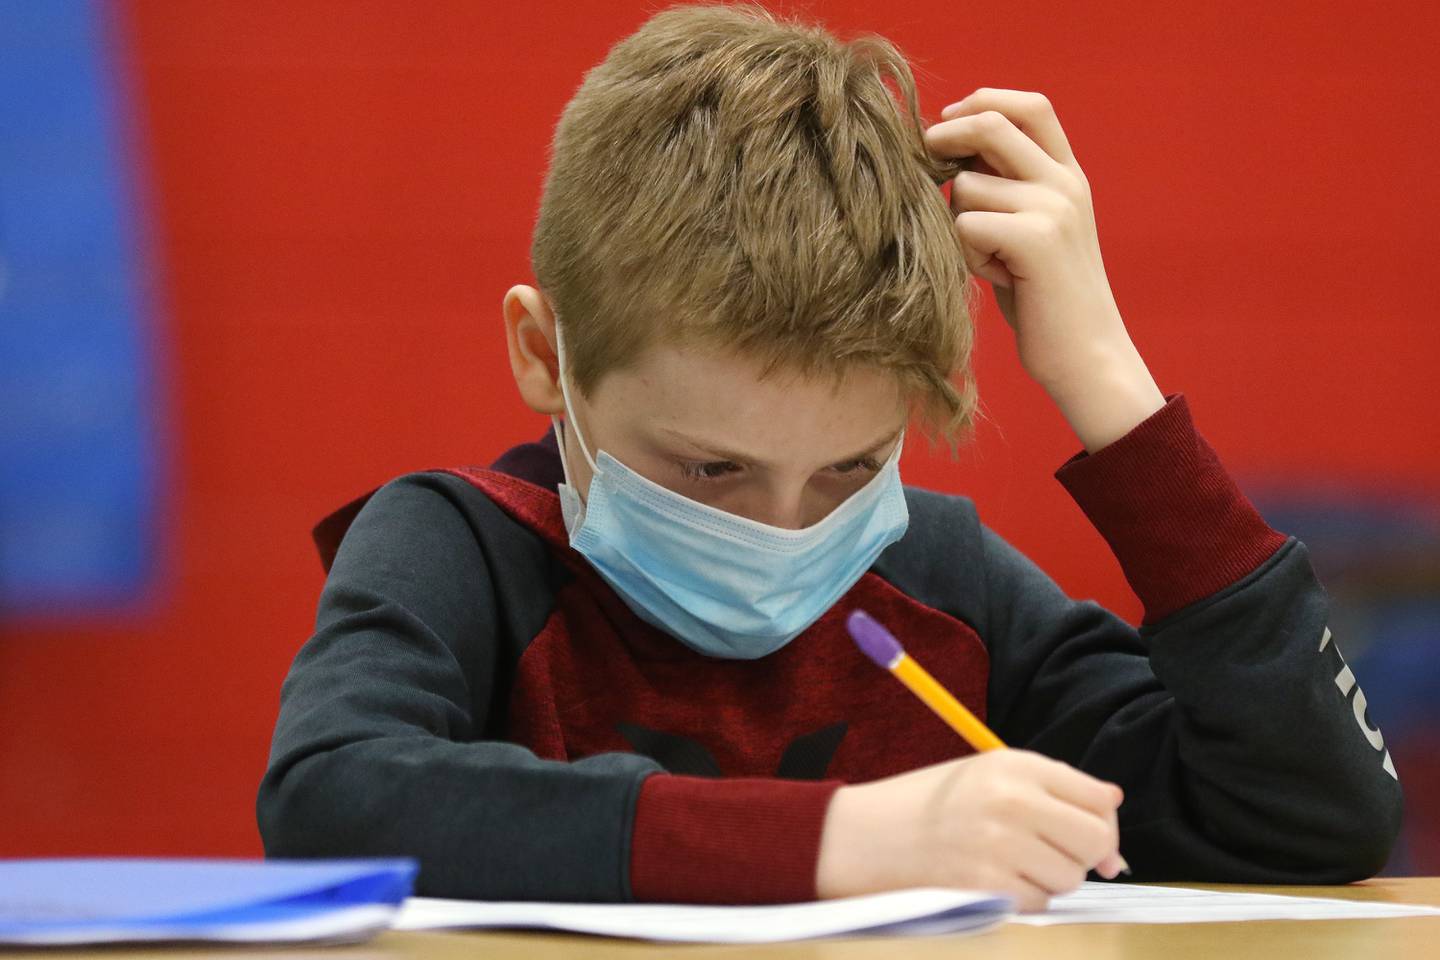 In this file photo from Wednesday, March 24, 2021, Terrence Criscione, a second grade student at Grant Elementary, works on his homework in an after school homework help program at Marengo Community Middle School in Marengo.